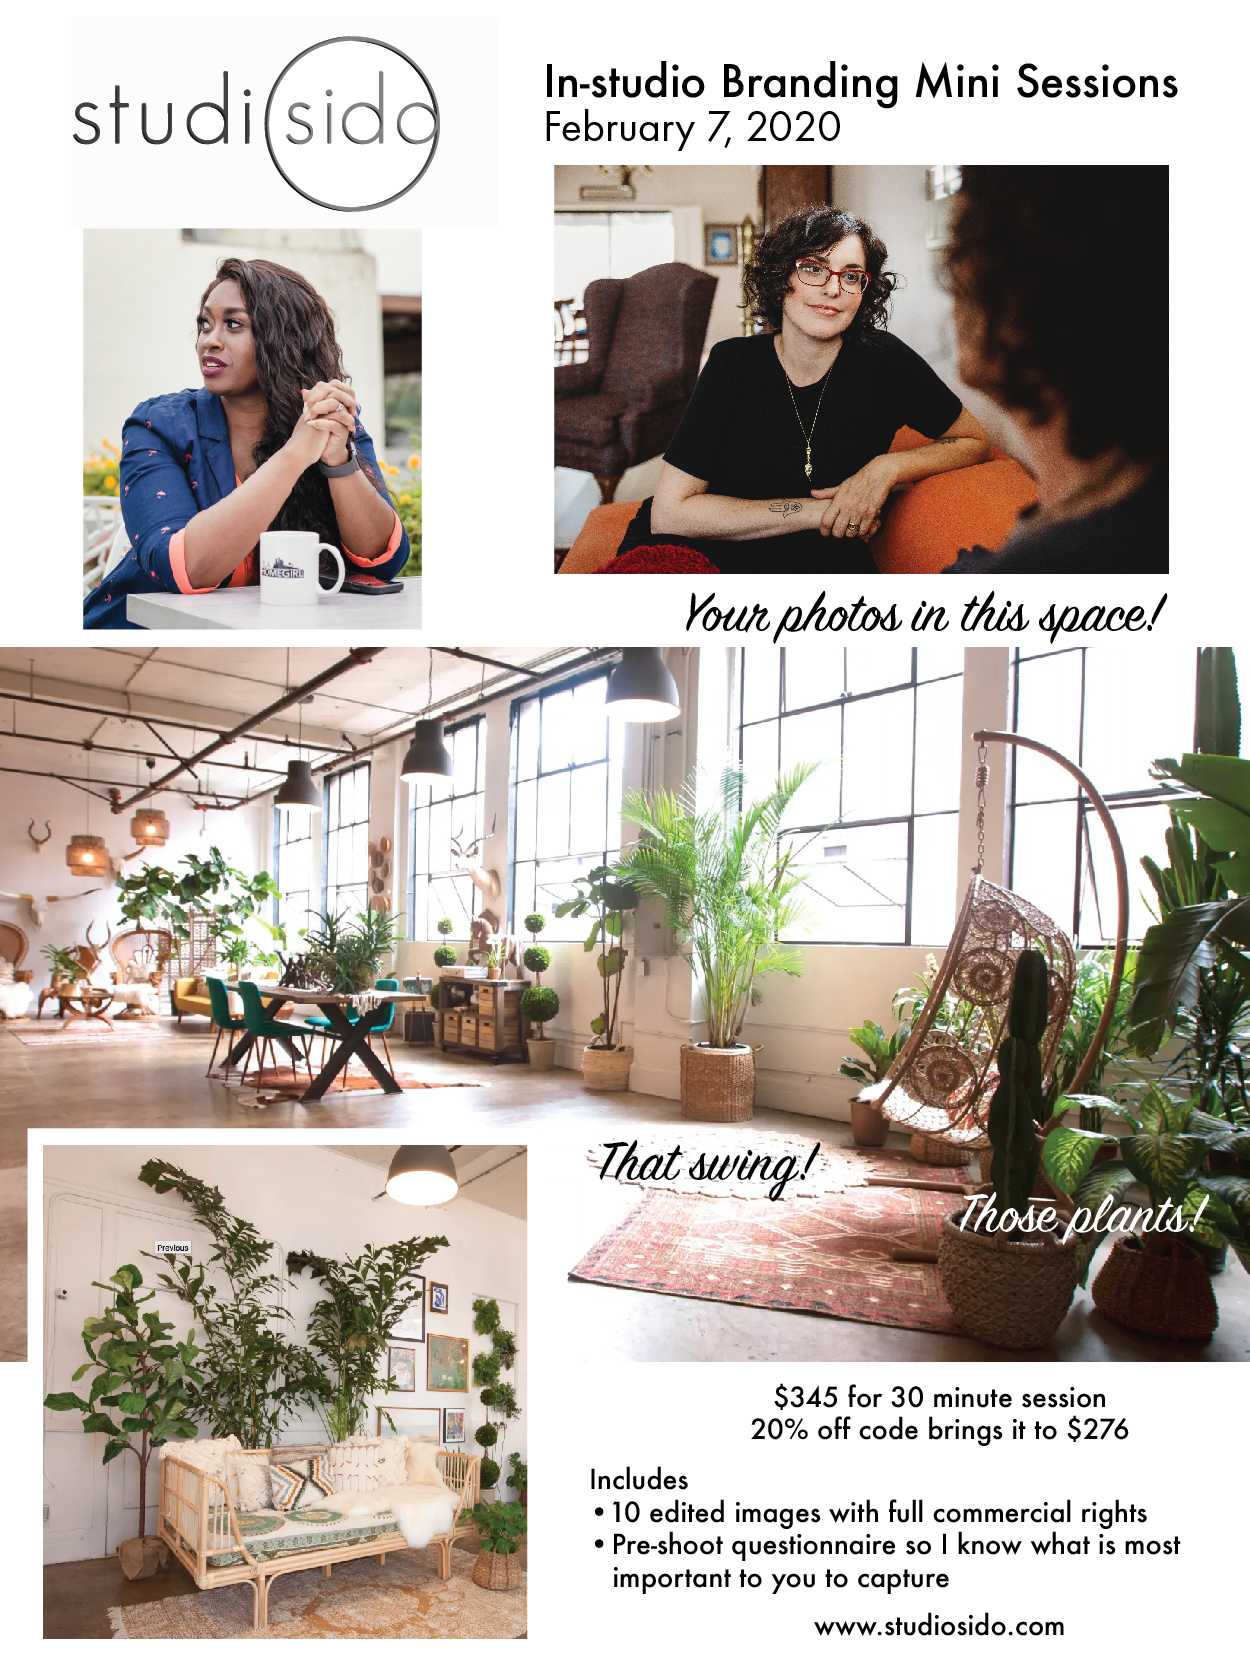 flyer design for photographer studiosido.com by diana kohne session in her beautiful warehouse space with plants and boho decor